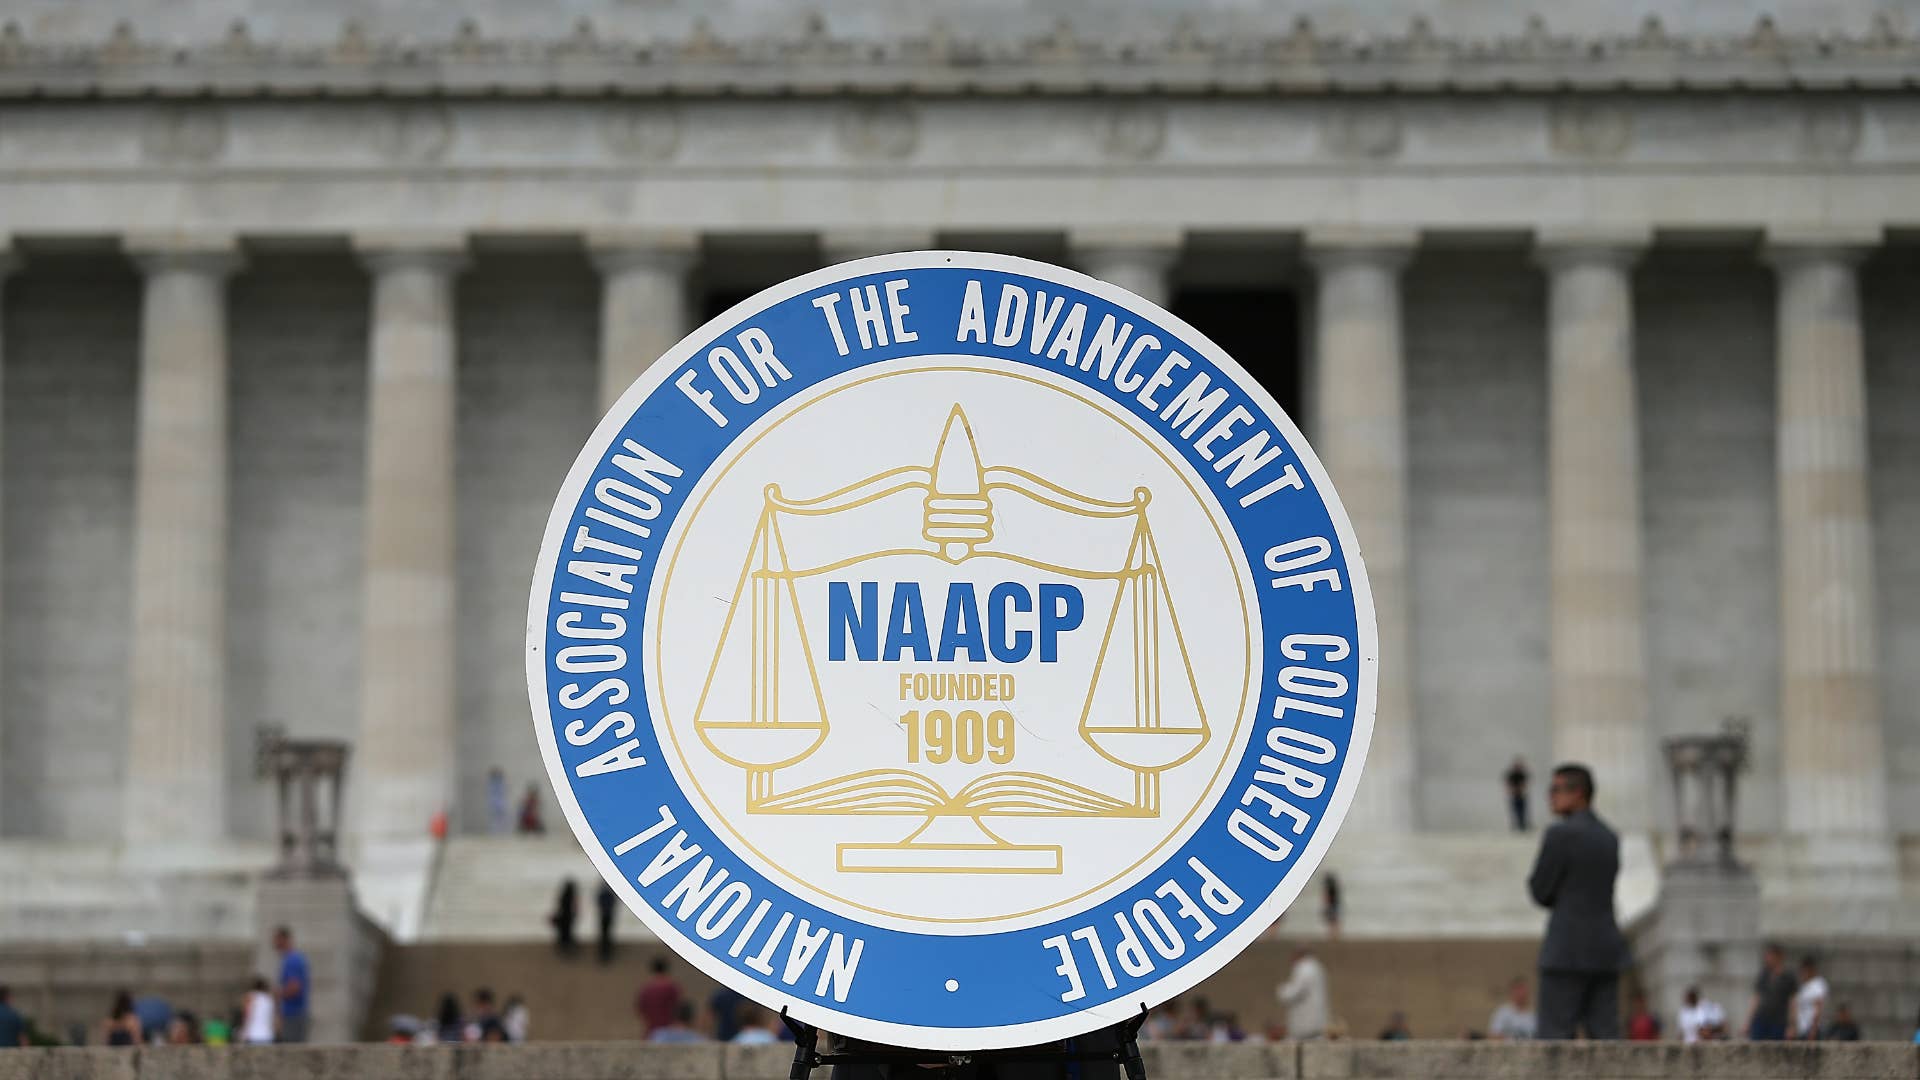 A logo is seen for the National Association for the Advancement of Colored People.